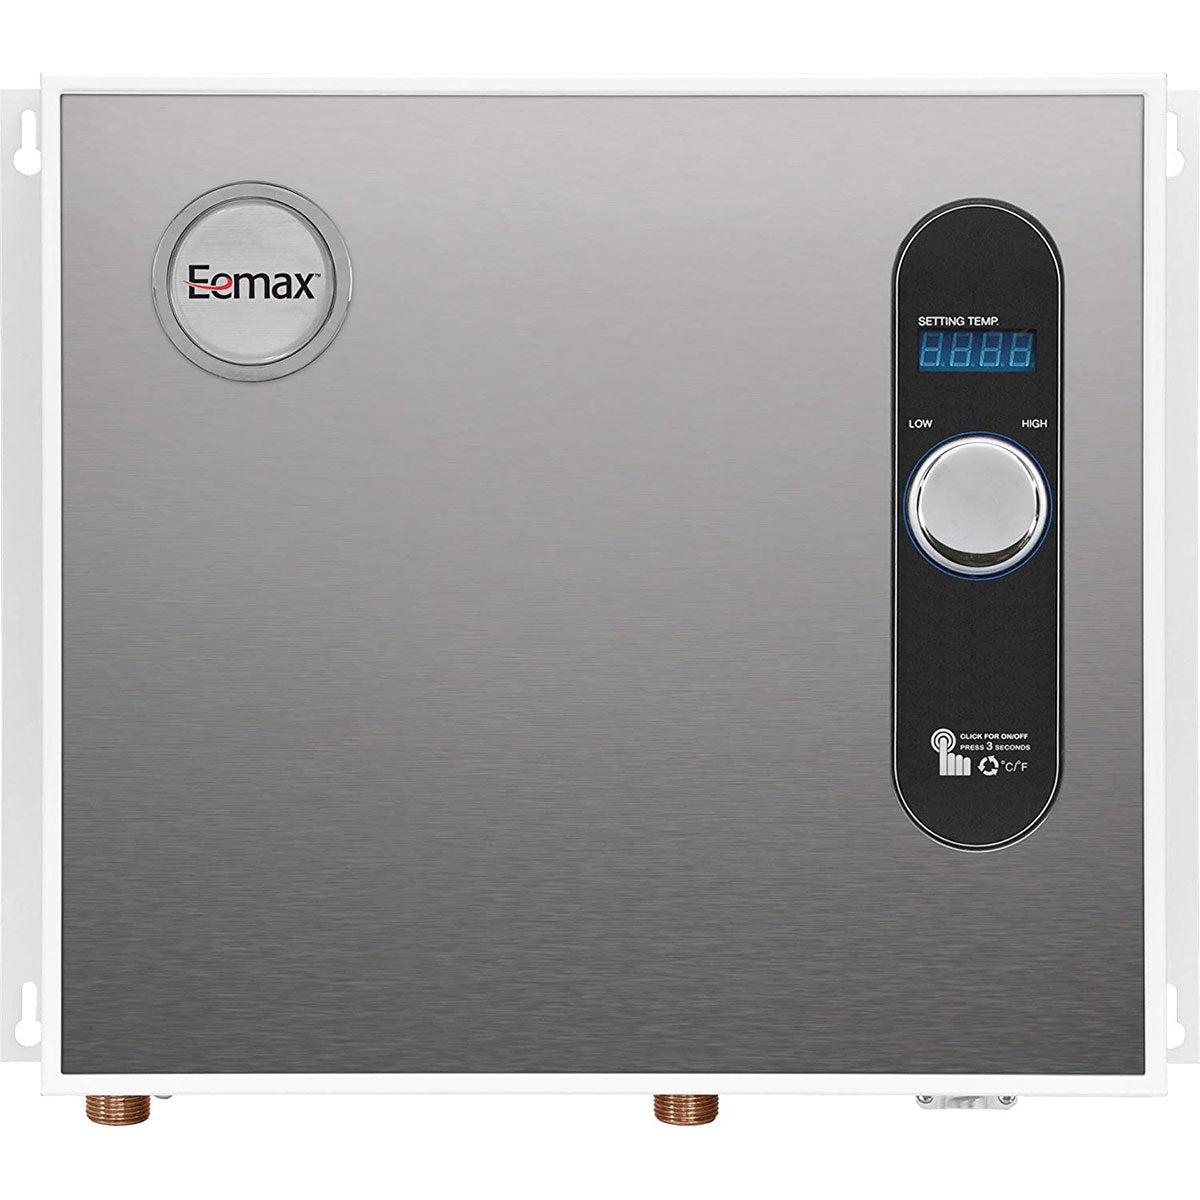 Eemax HomeAdvantage II 24kW 240V Electric Tankless Water Heater